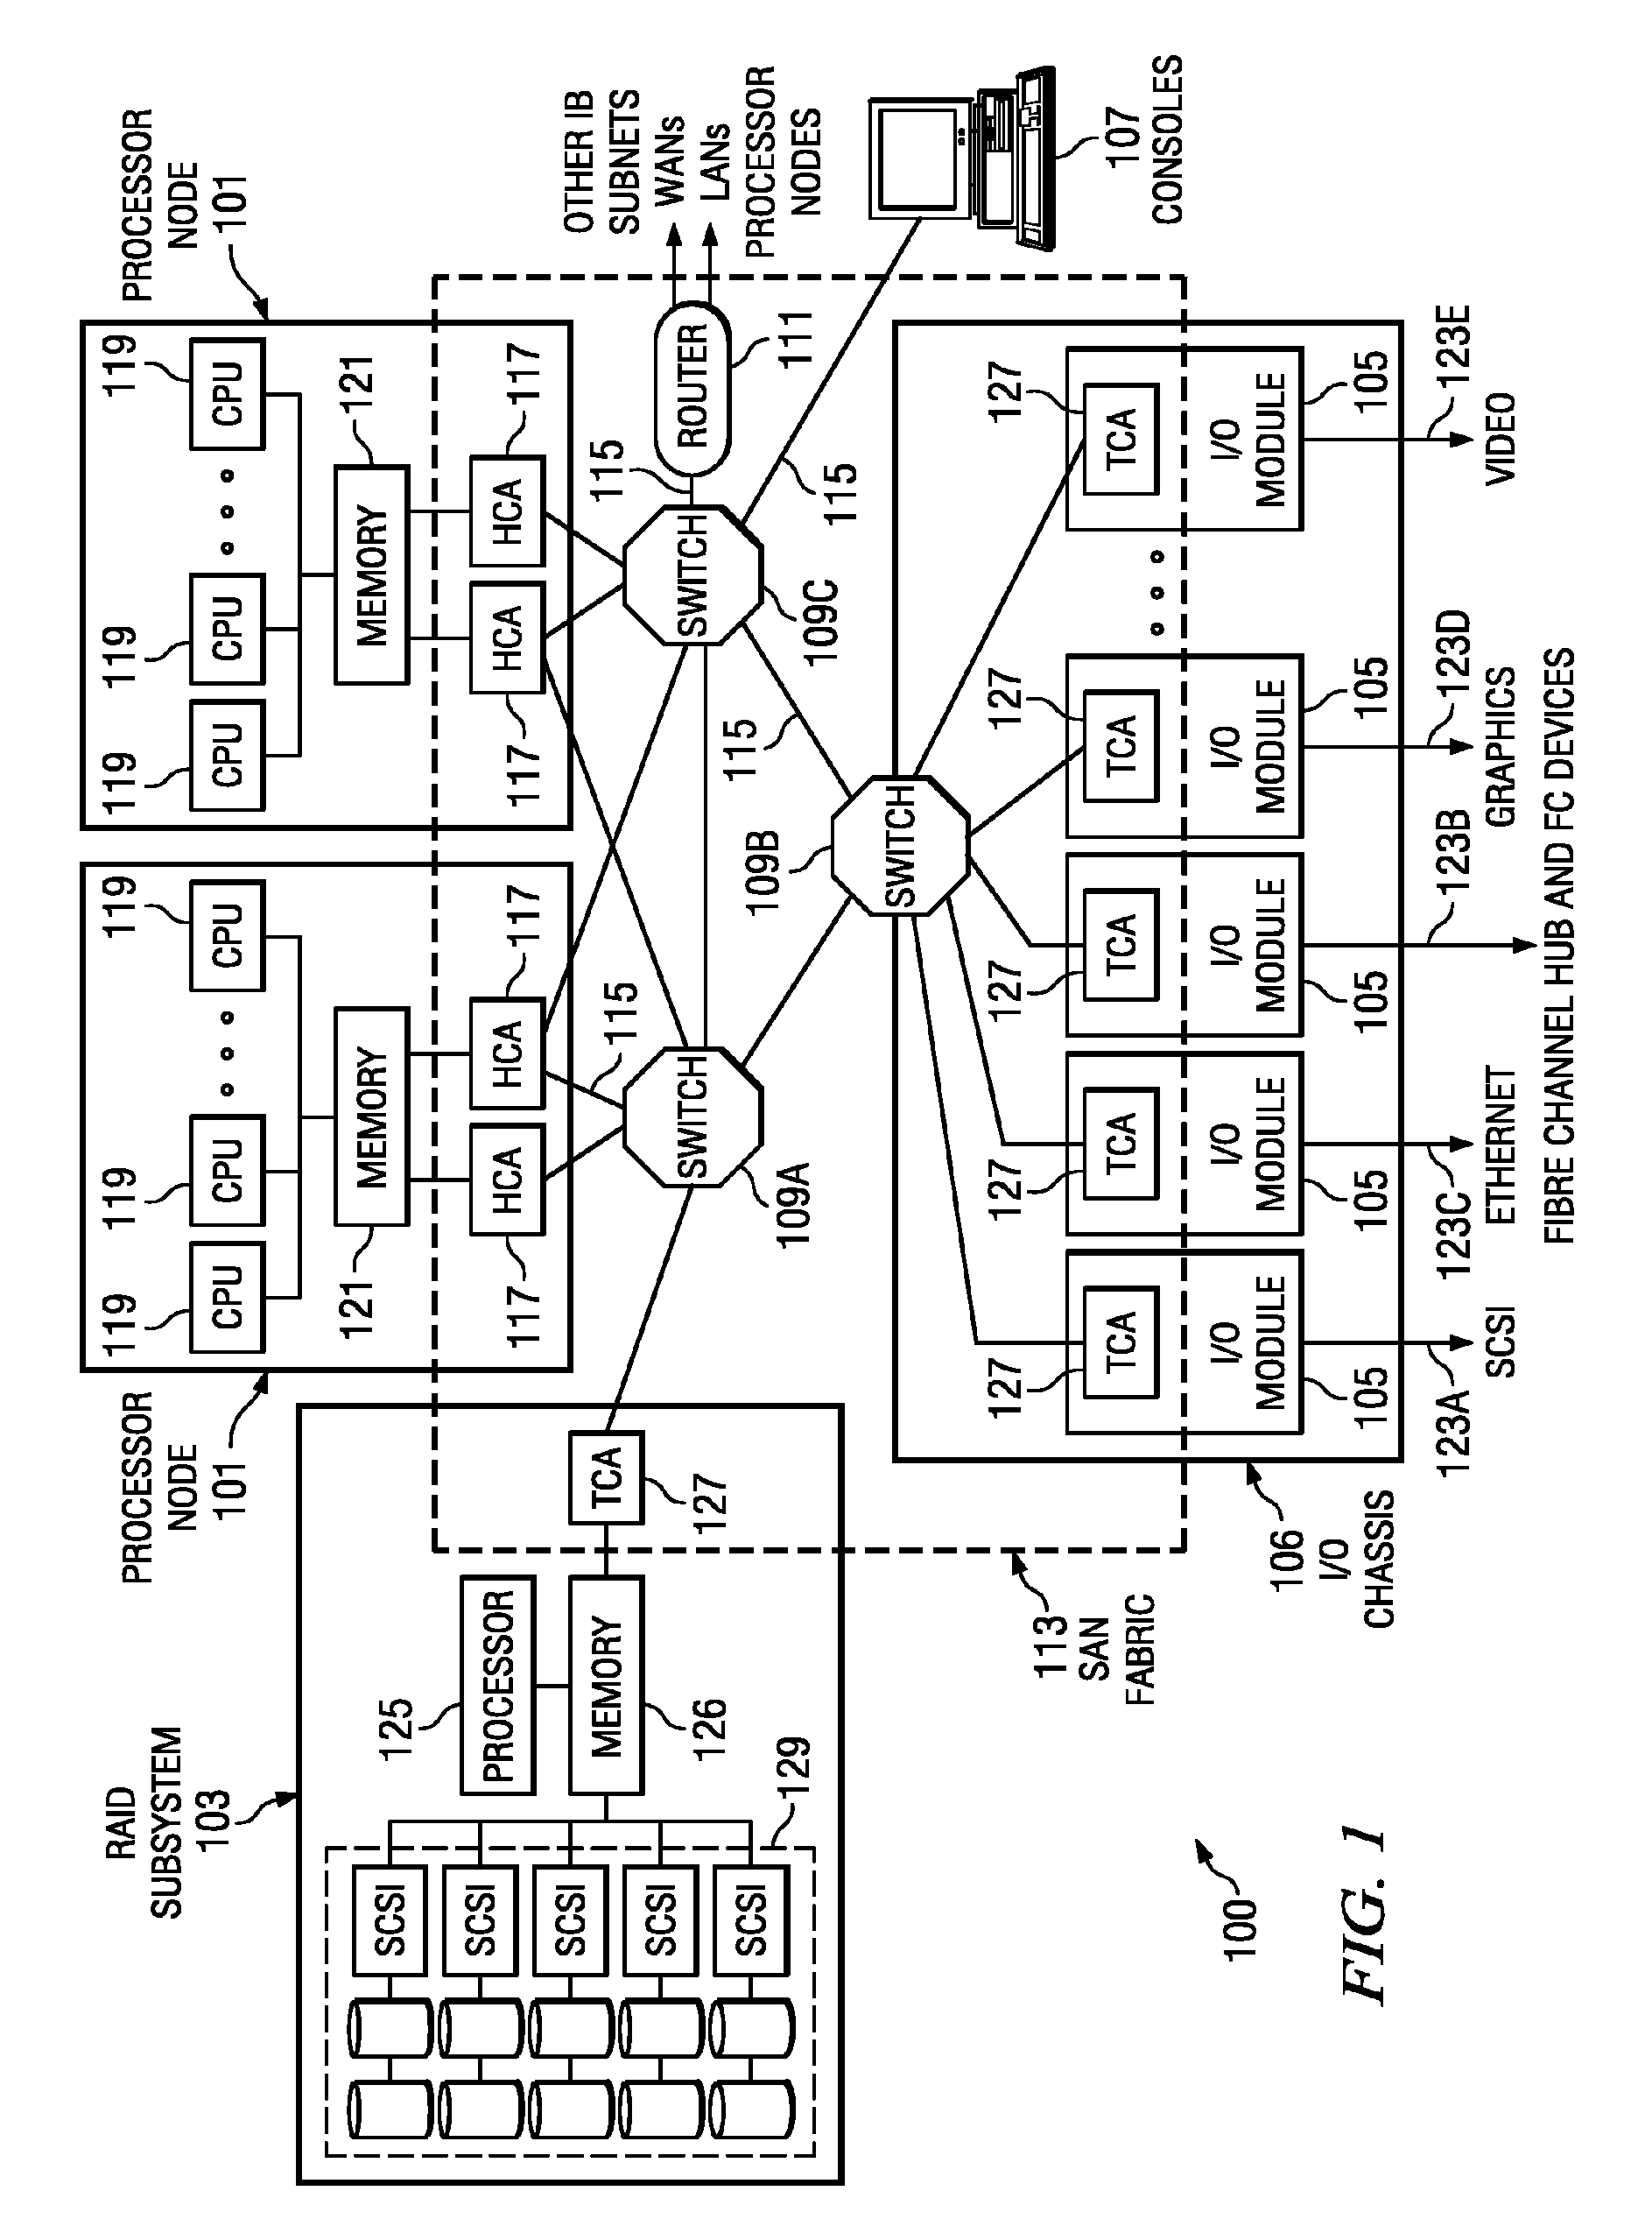 Preventing IP spoofing and facilitating parsing of private data areas in system area network connection requests